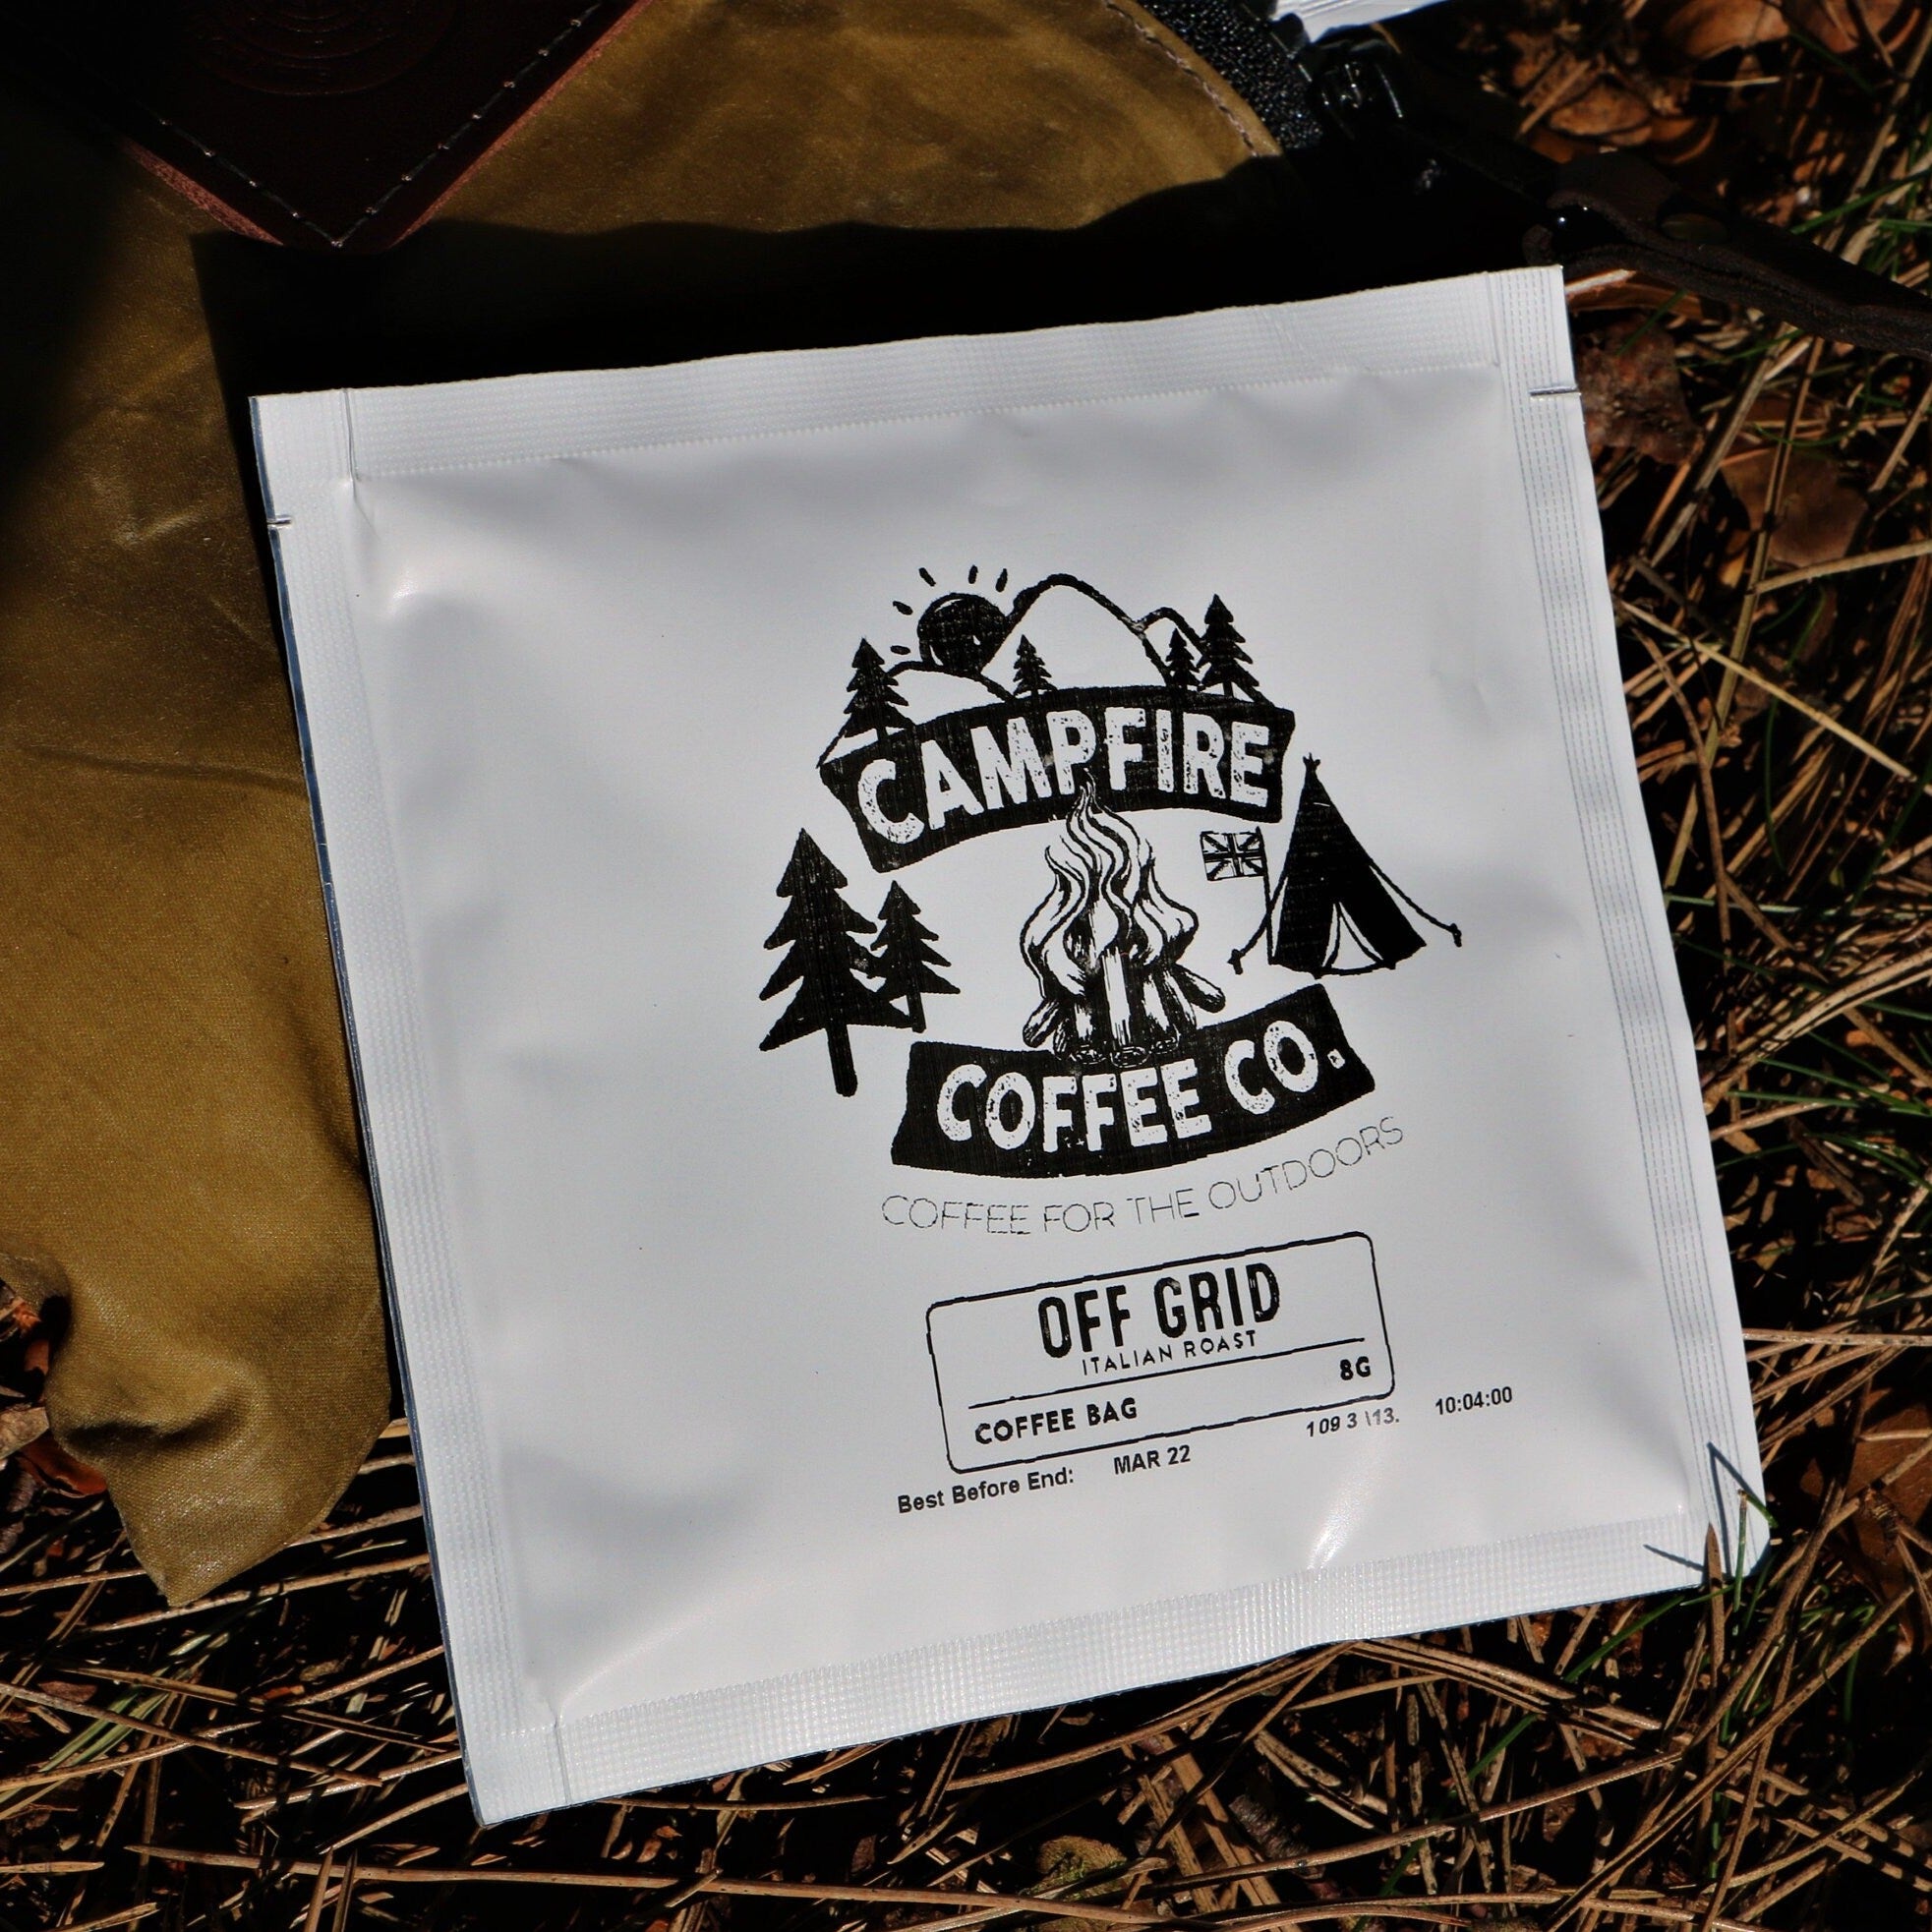 Campfire coffee bags